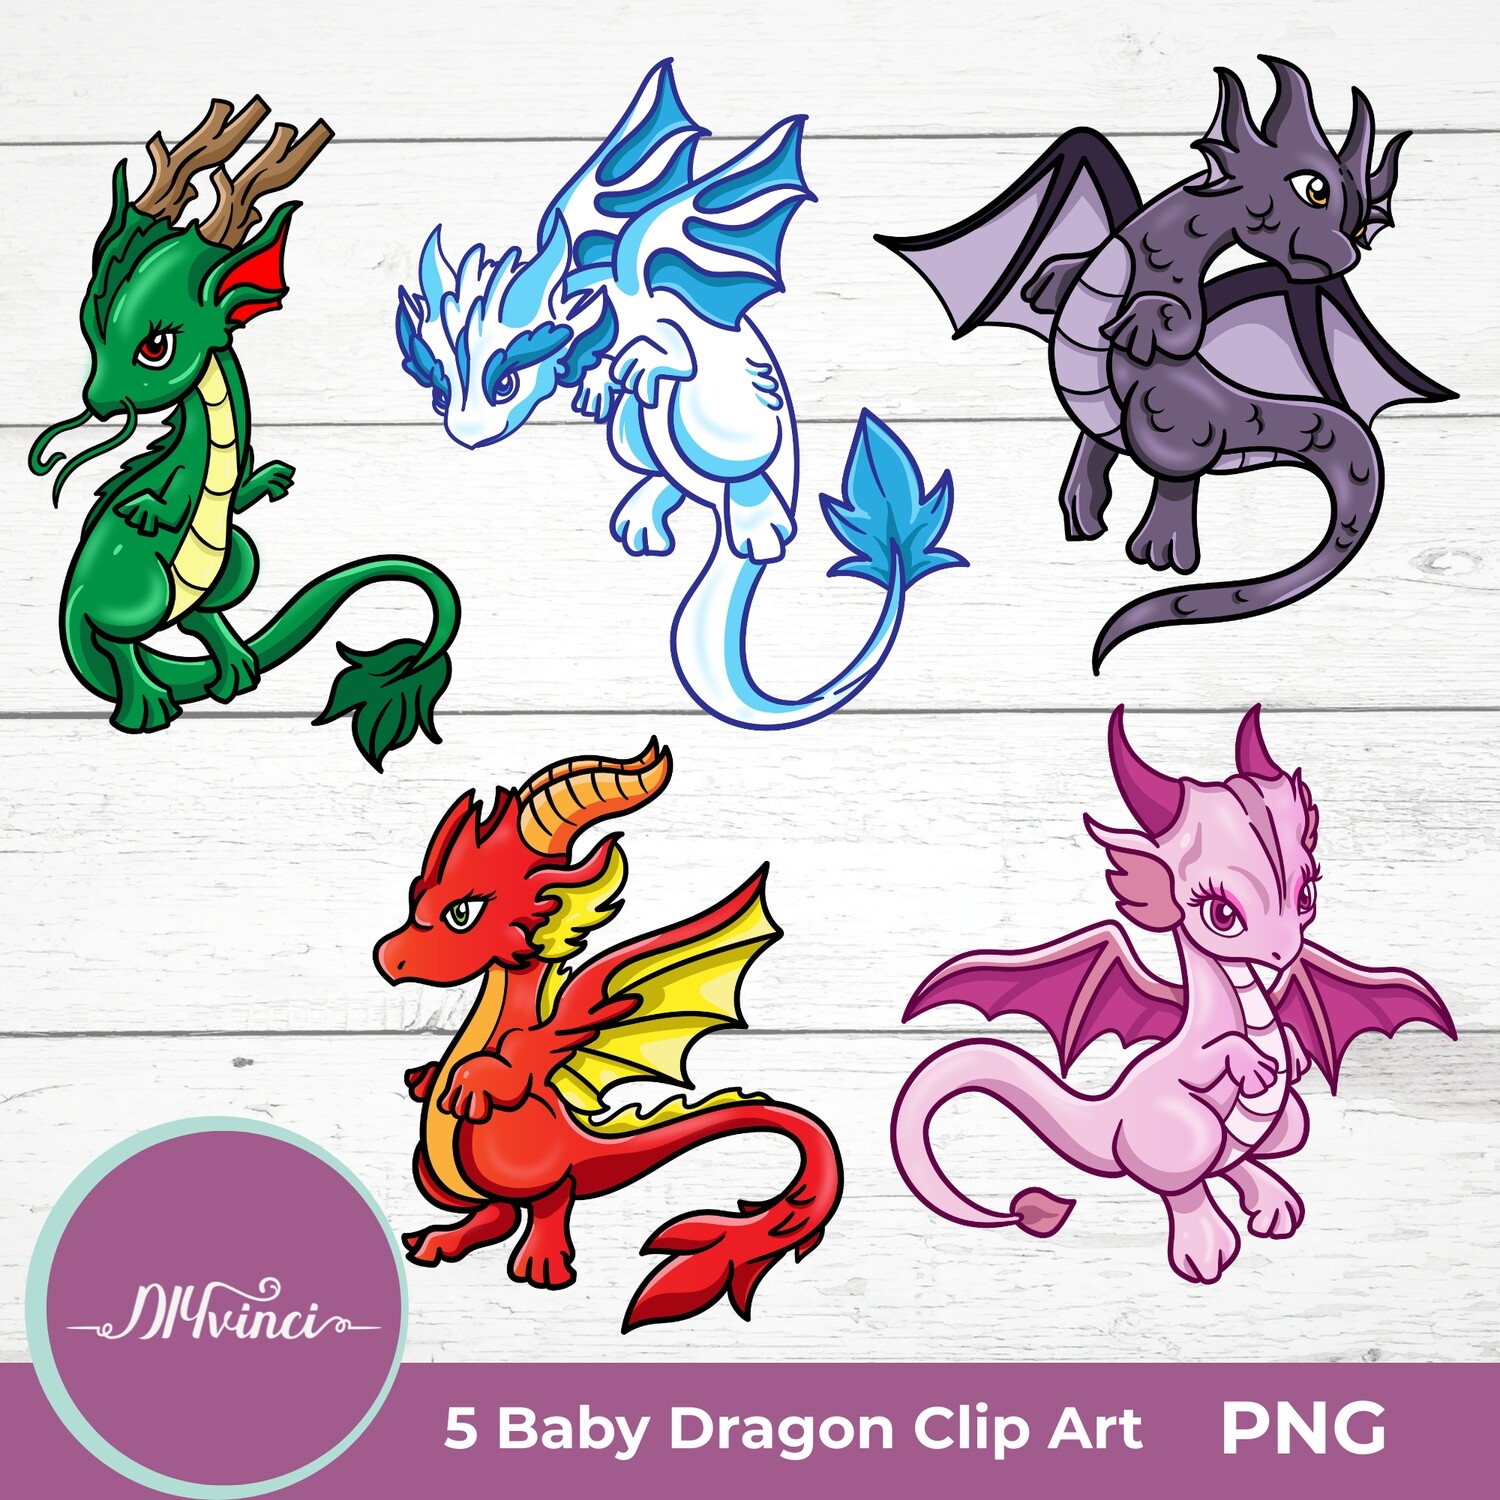 5 Baby Dragon Clip Art - PNG - Personal & Commercial Use